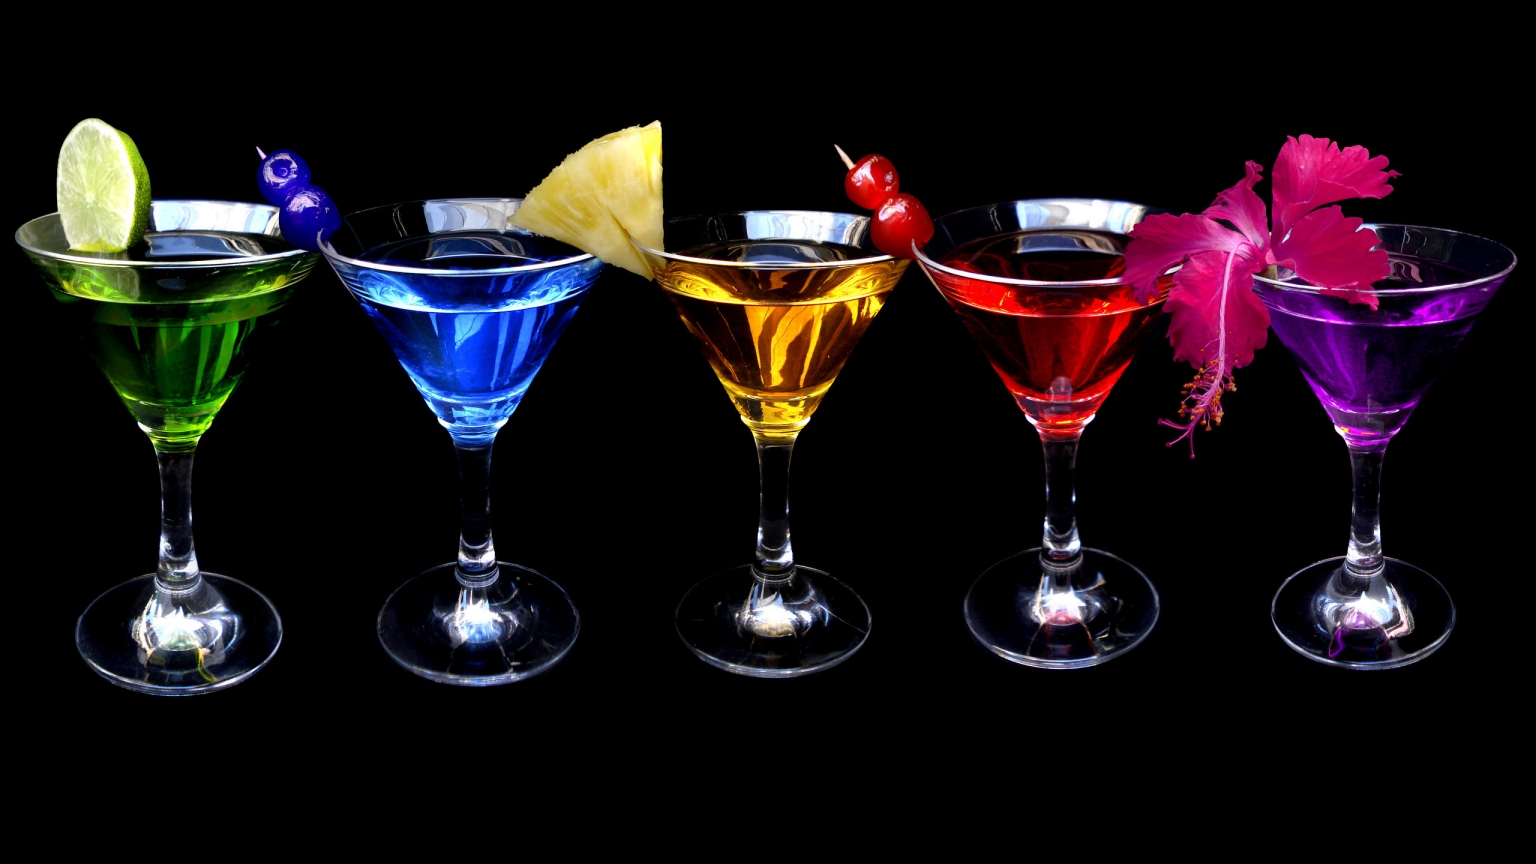 New Summer Cocktails for 1536 x 864 HDTV resolution